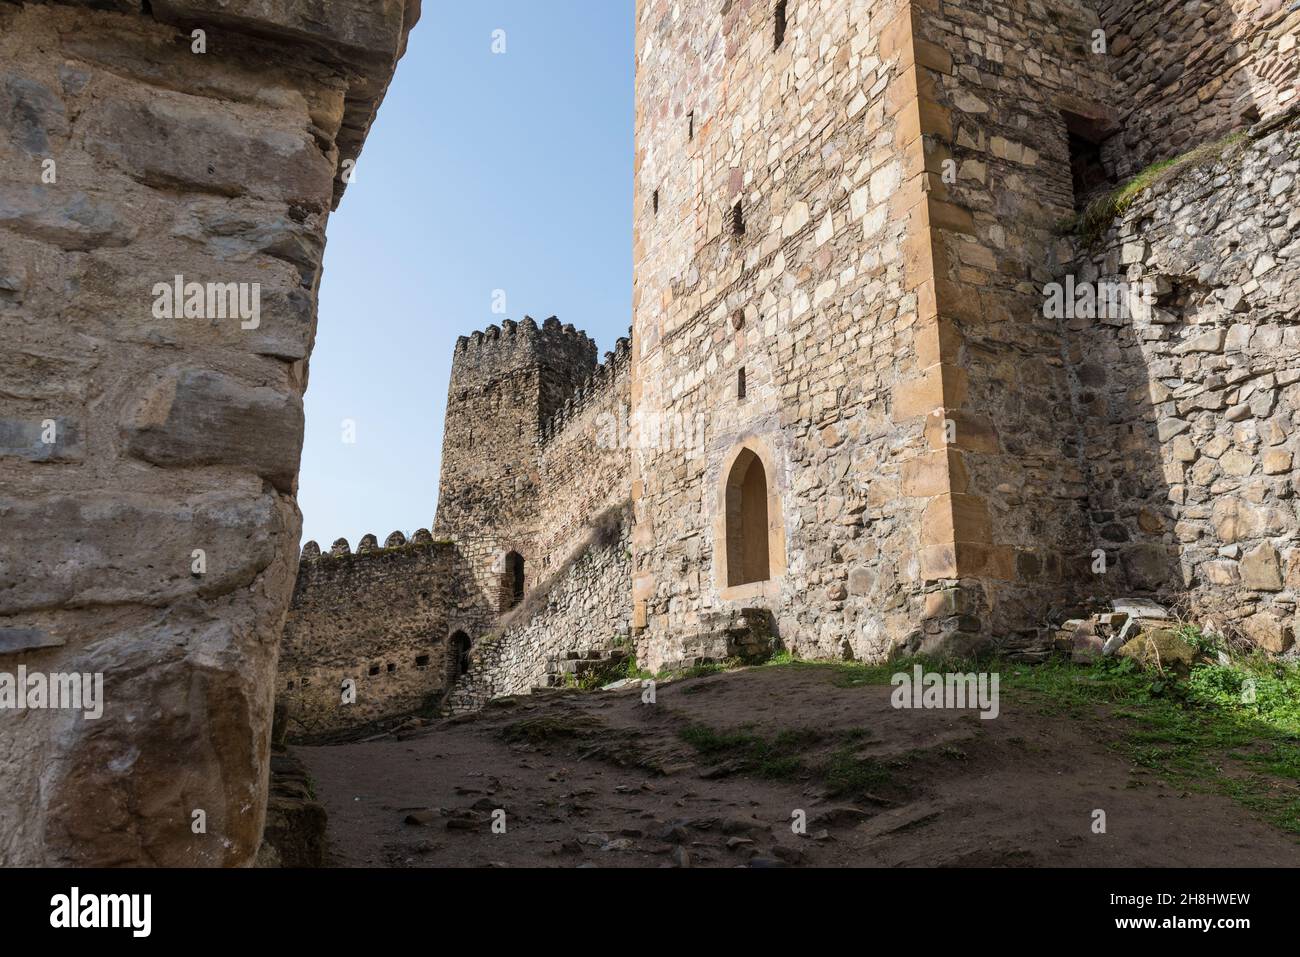 View between the walls of the Ananuri castle, near the Zhinvali Reservoir. Georgia, Caucasus Stock Photo